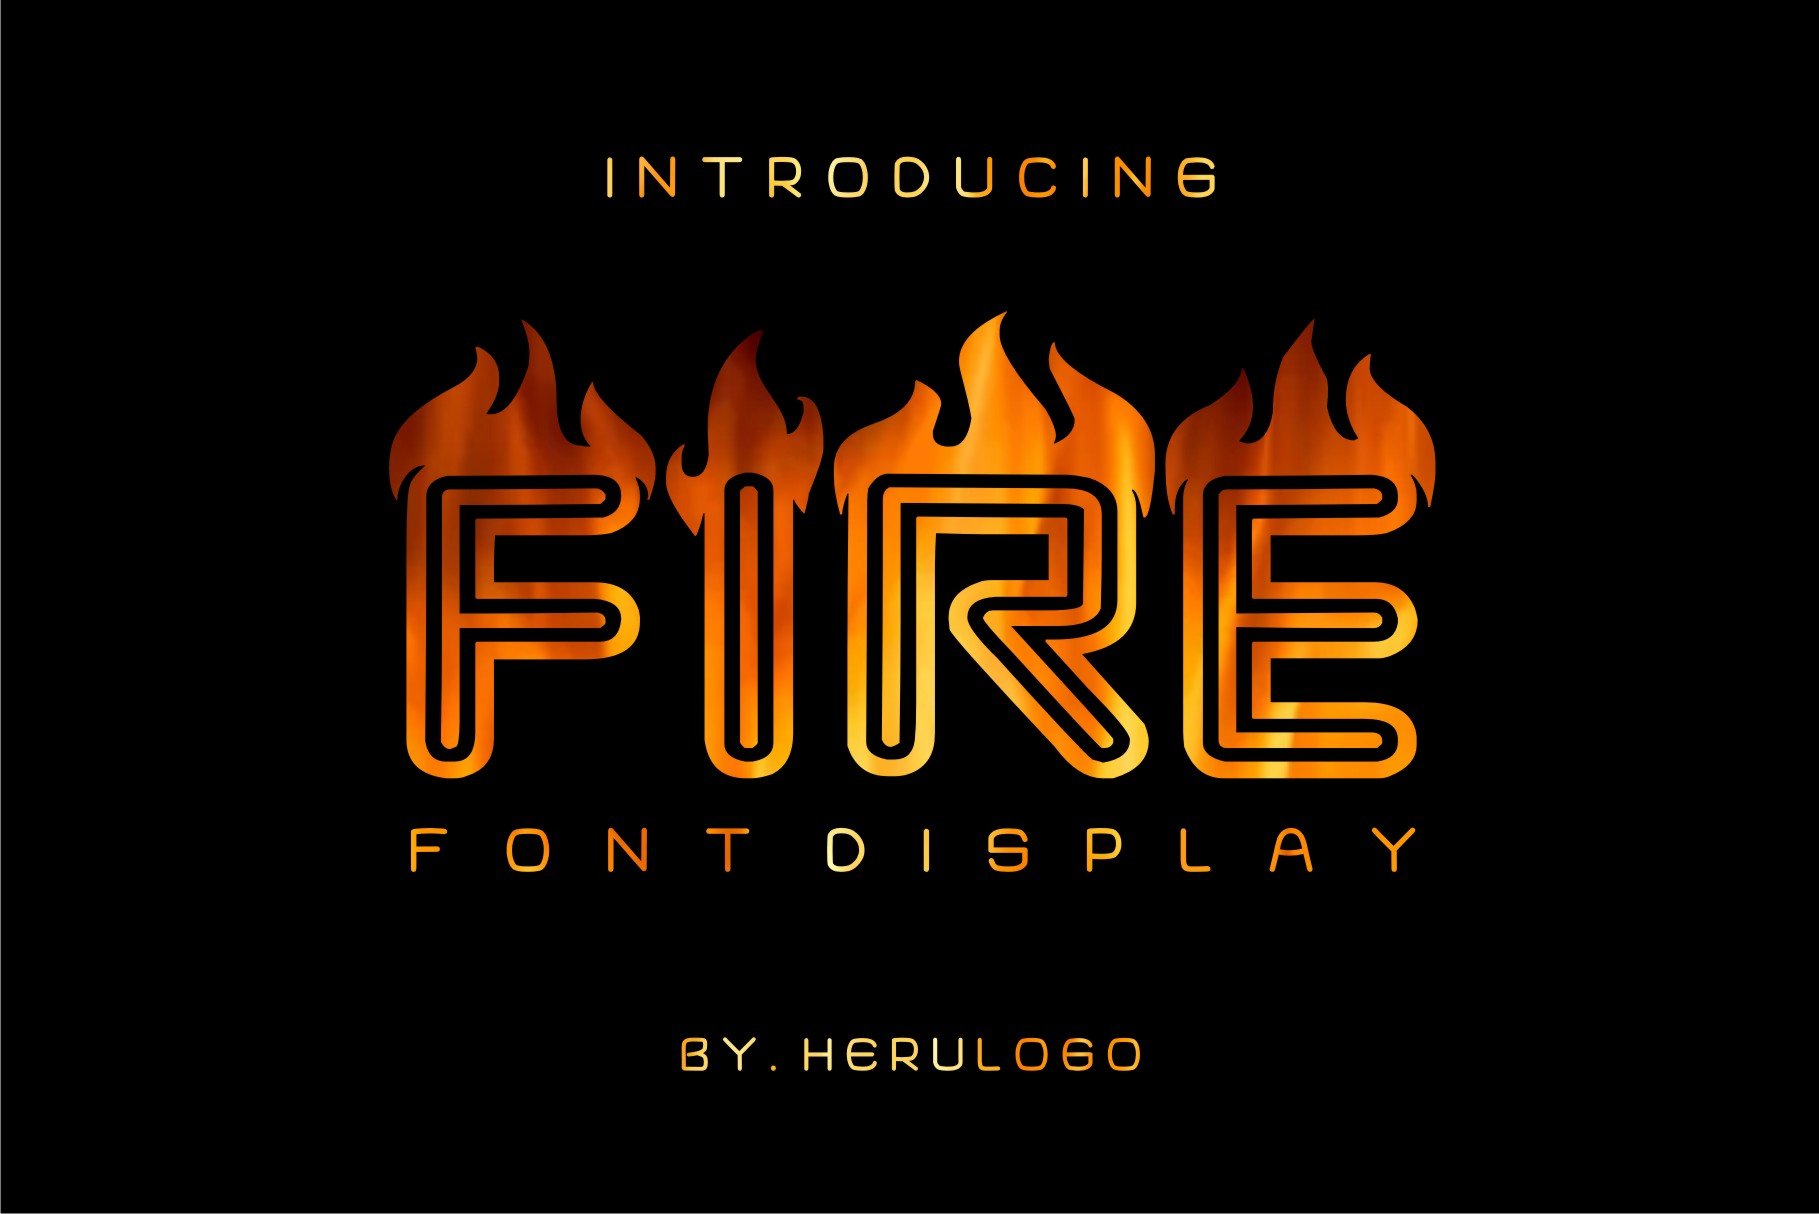 FIRE display Font cover image.